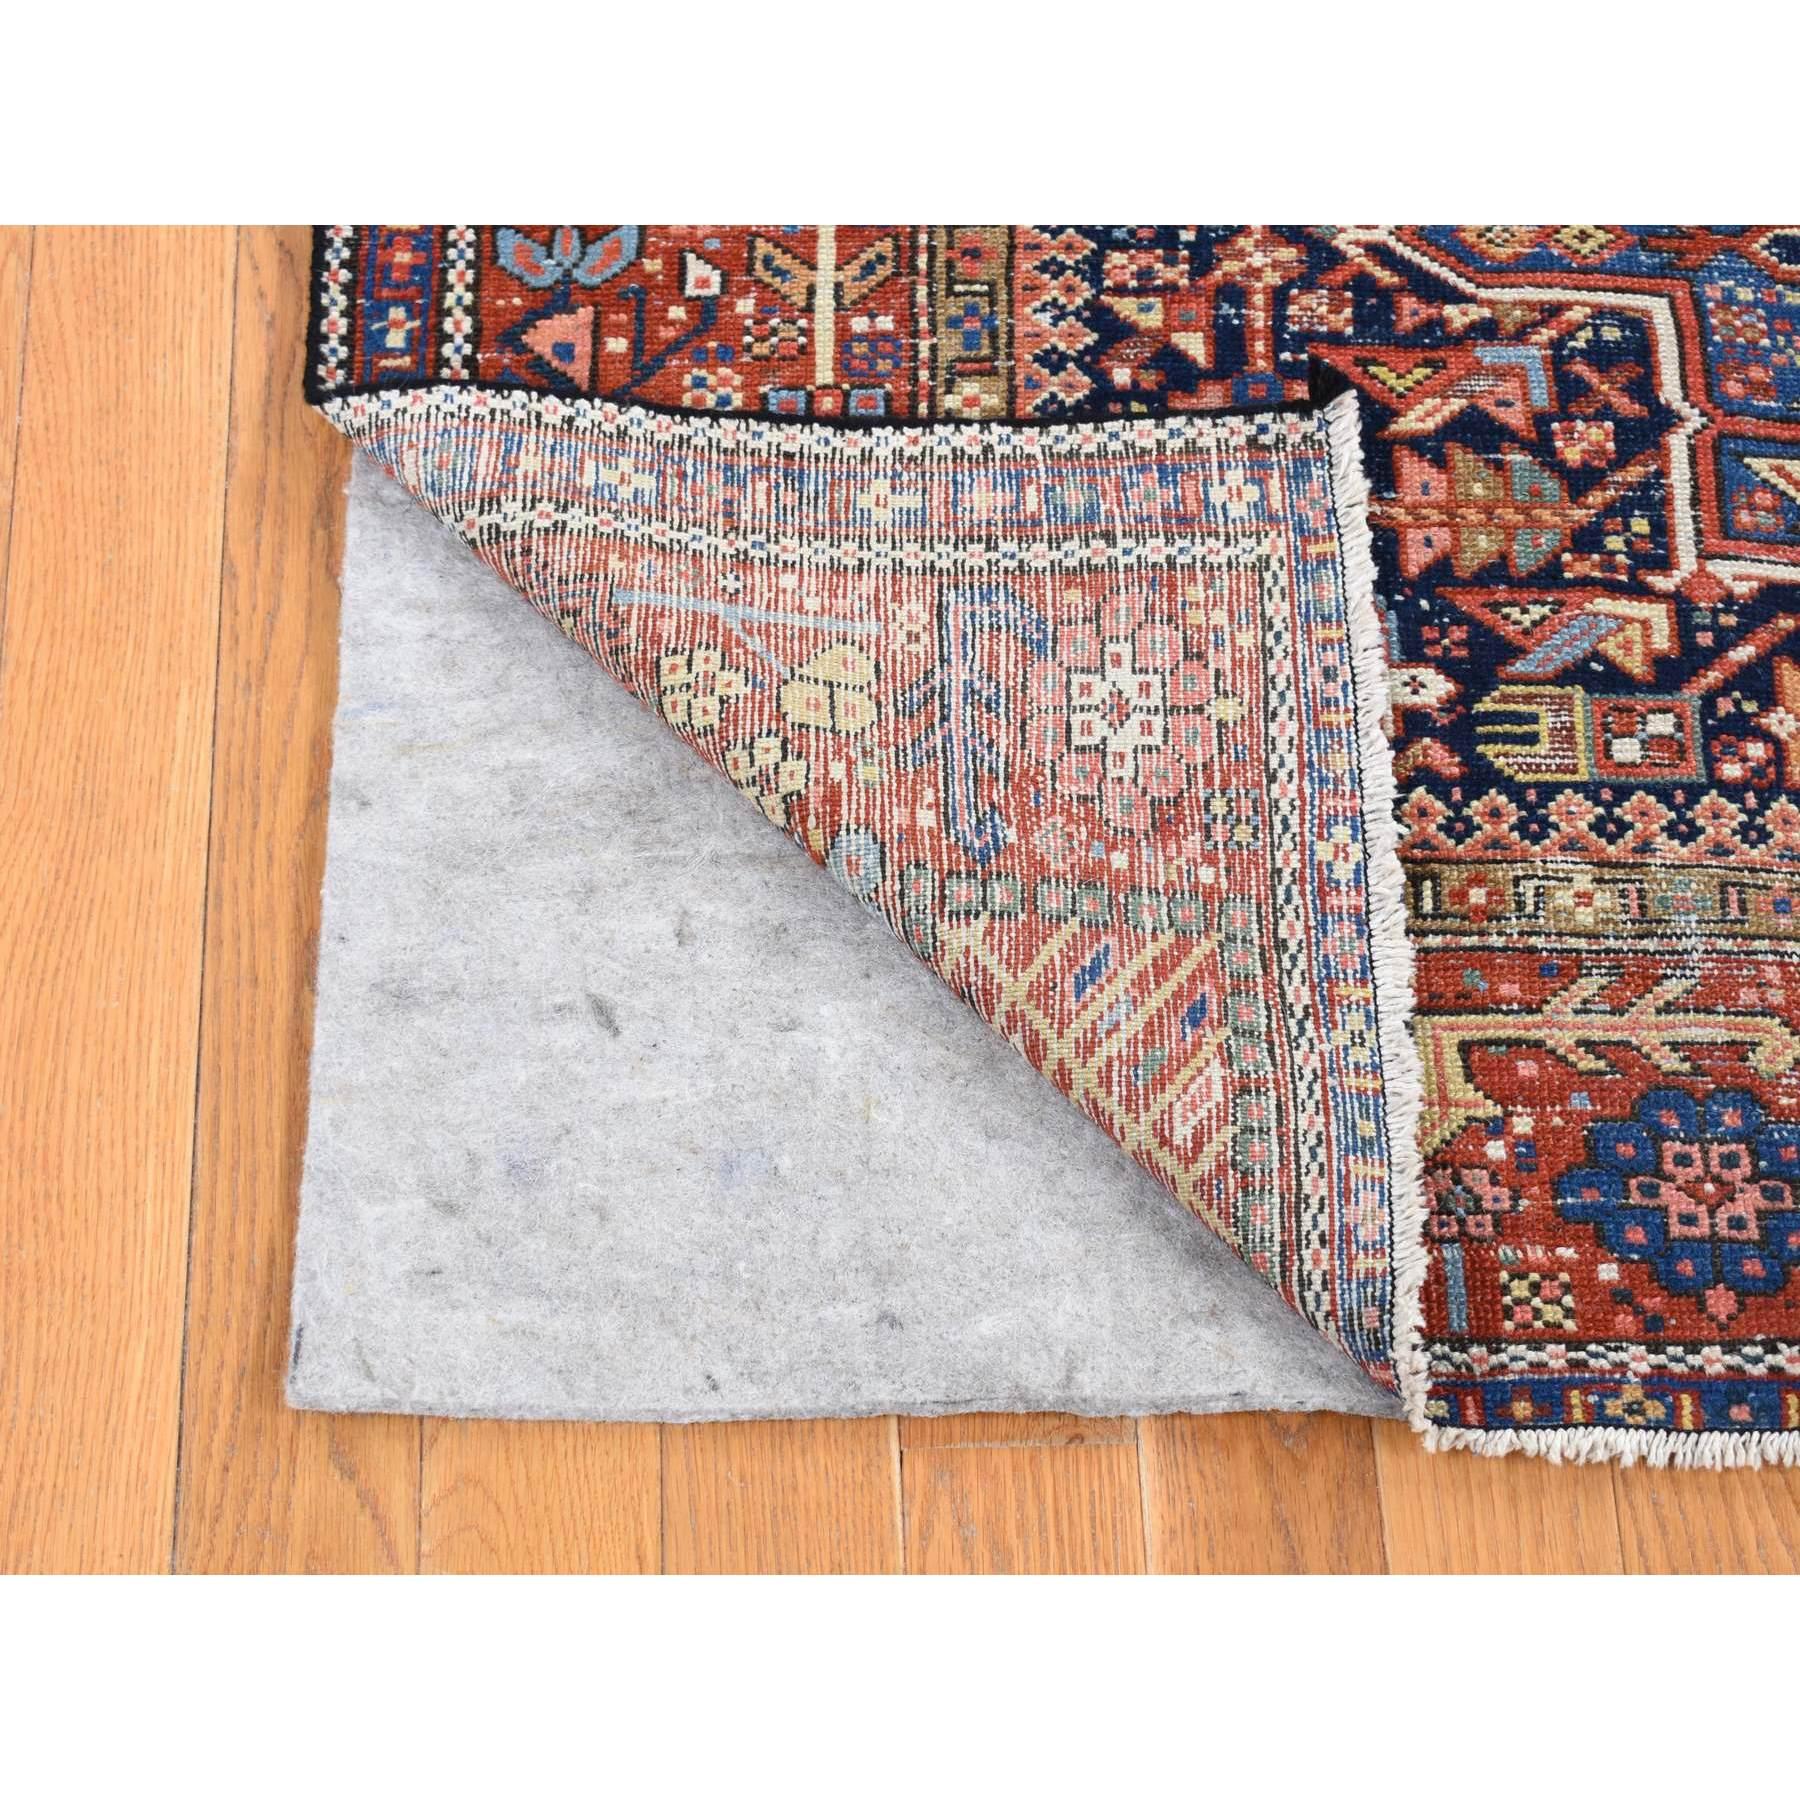 Medieval Denim Antique Persian Karajeh Good Condition Soft Wool Hand Knotted Clean Rug